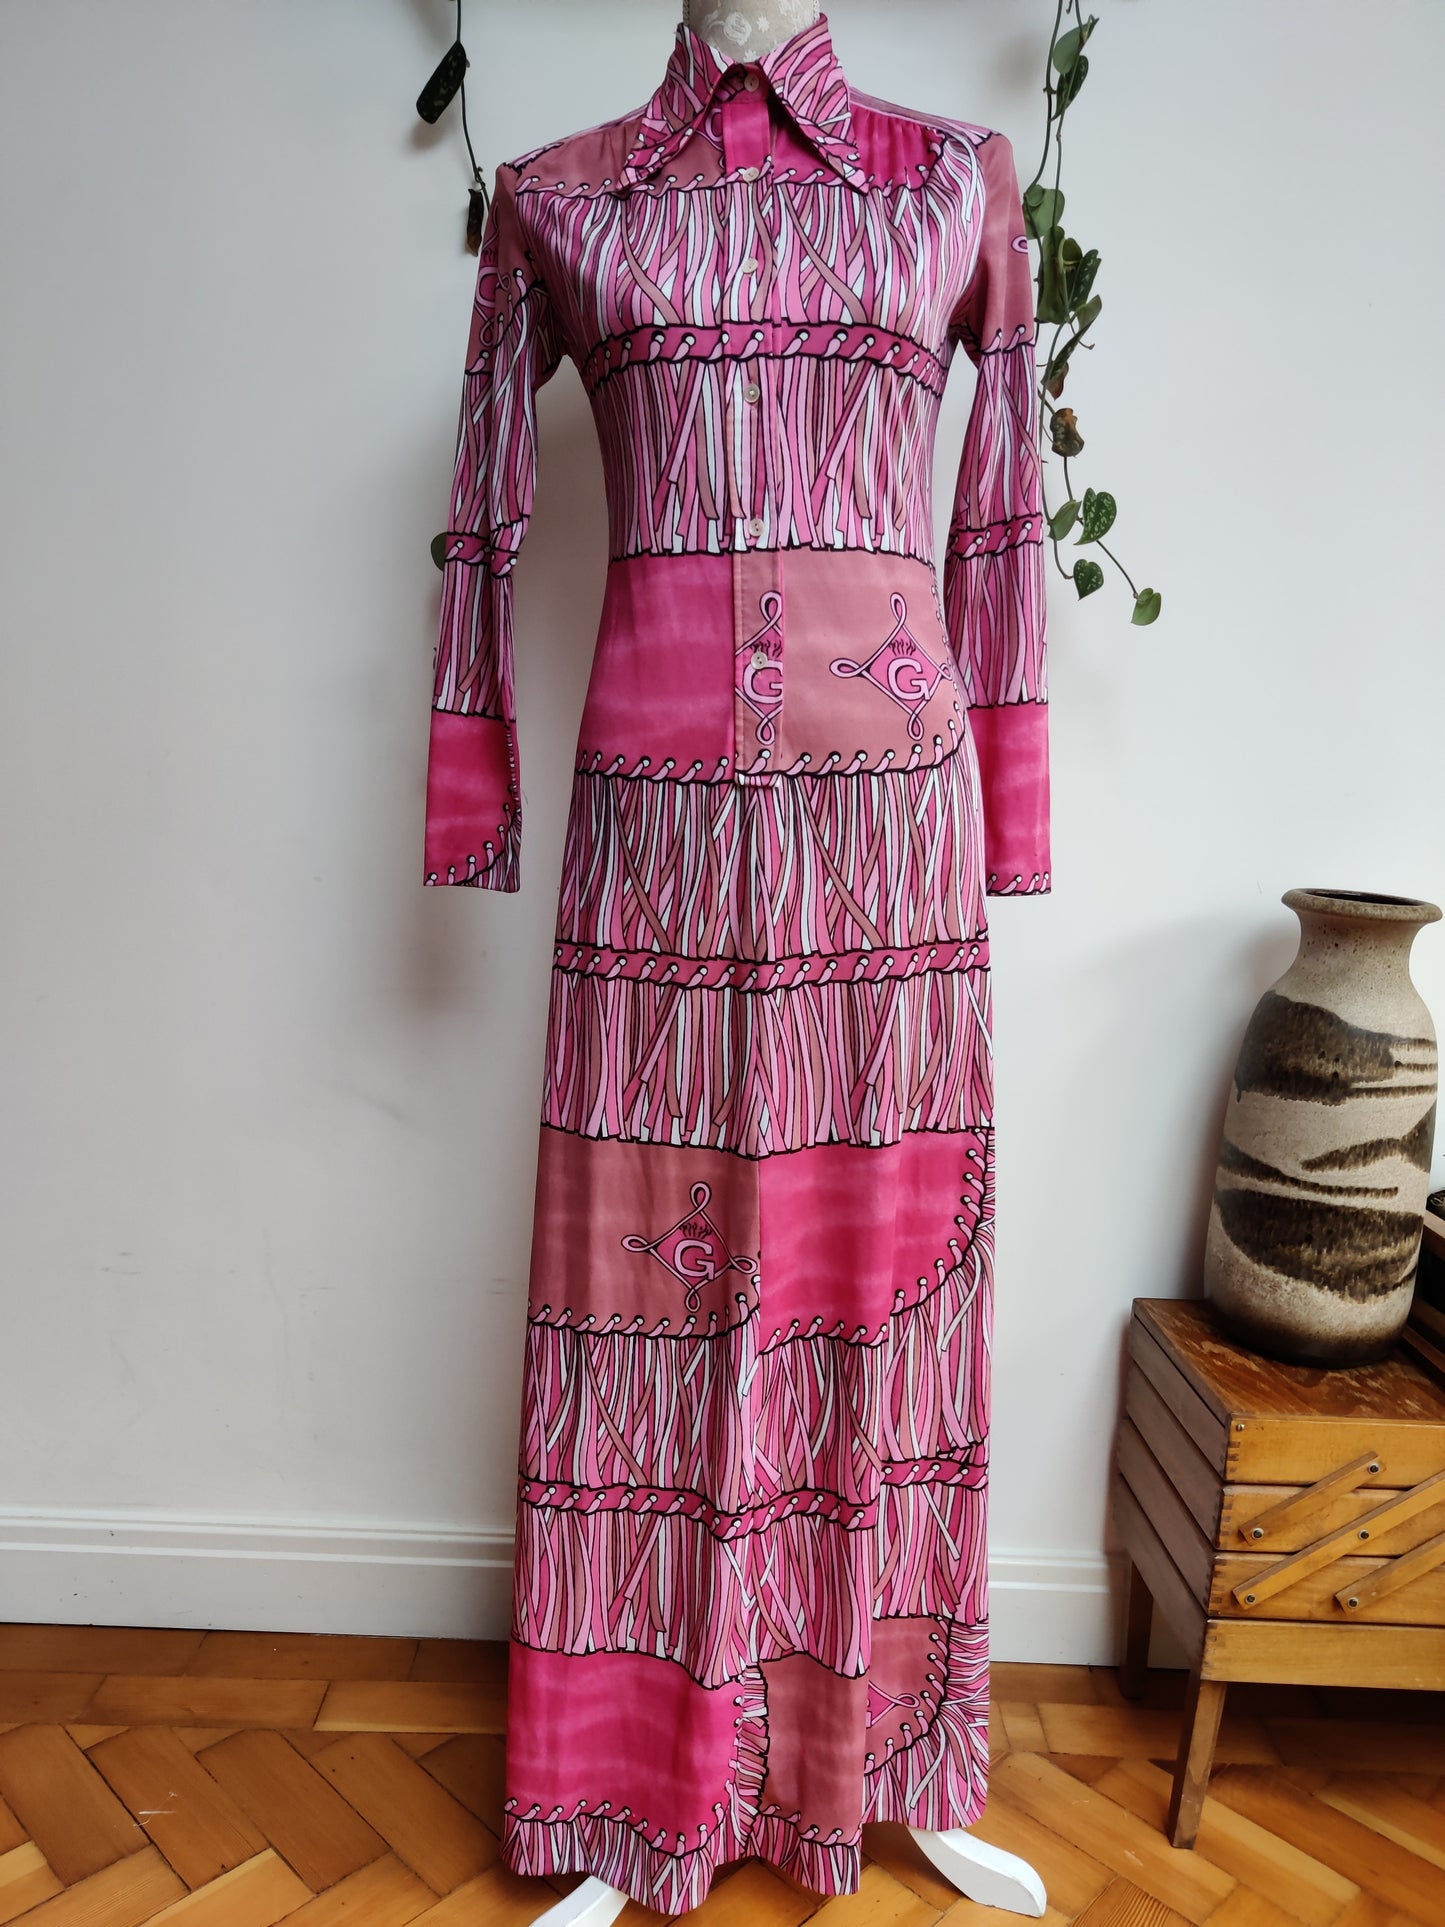 vintage 70s dress in pink psychedelic print.